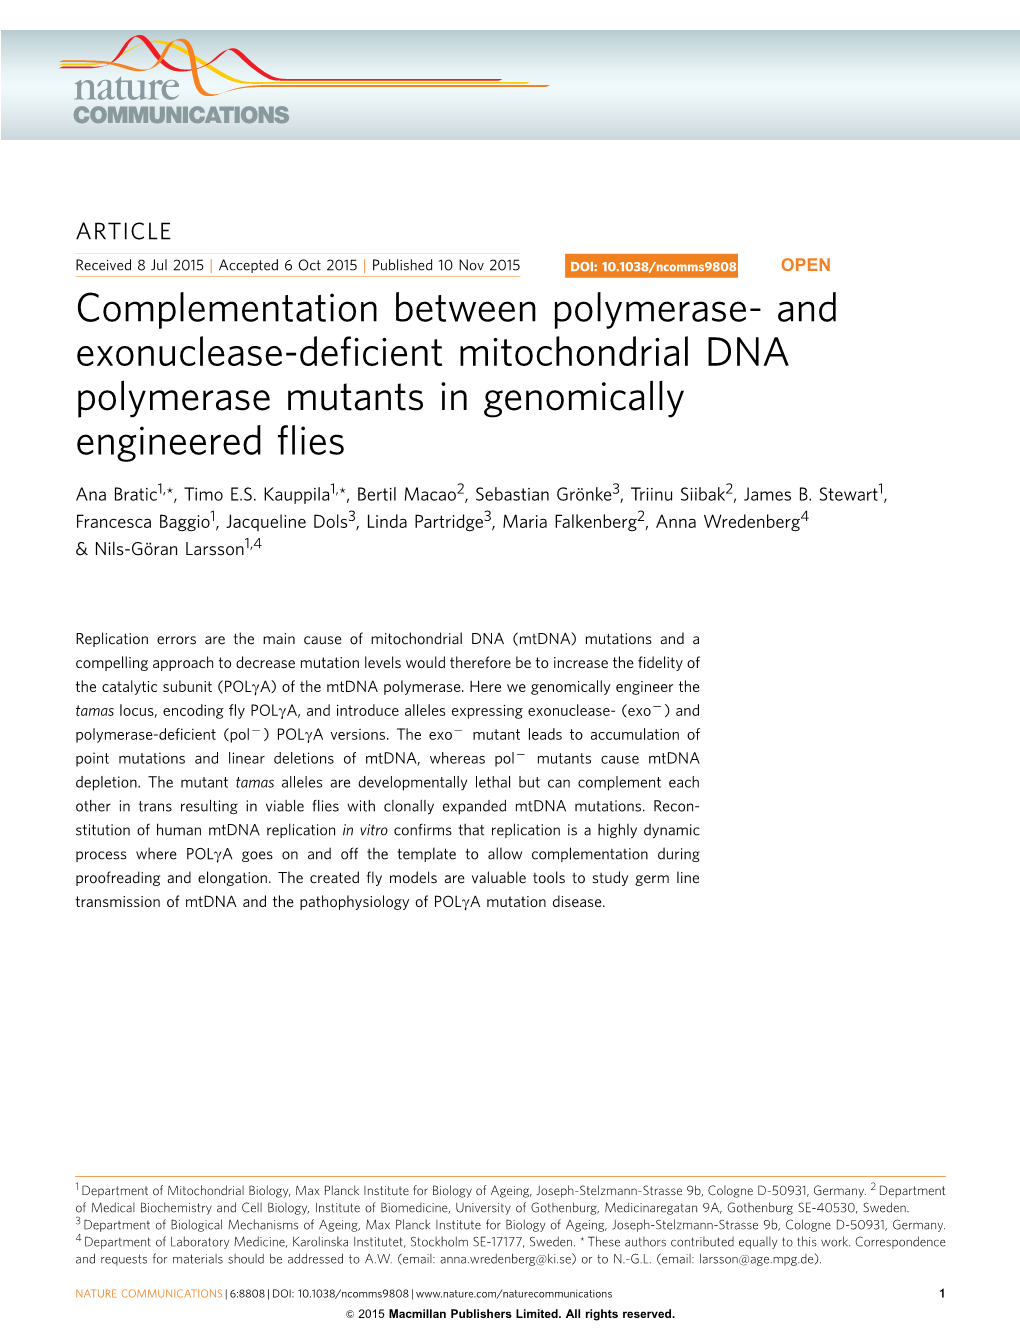 And Exonuclease-Deficient Mitochondrial DNA Polymerase Mutants in Genomically Engineered